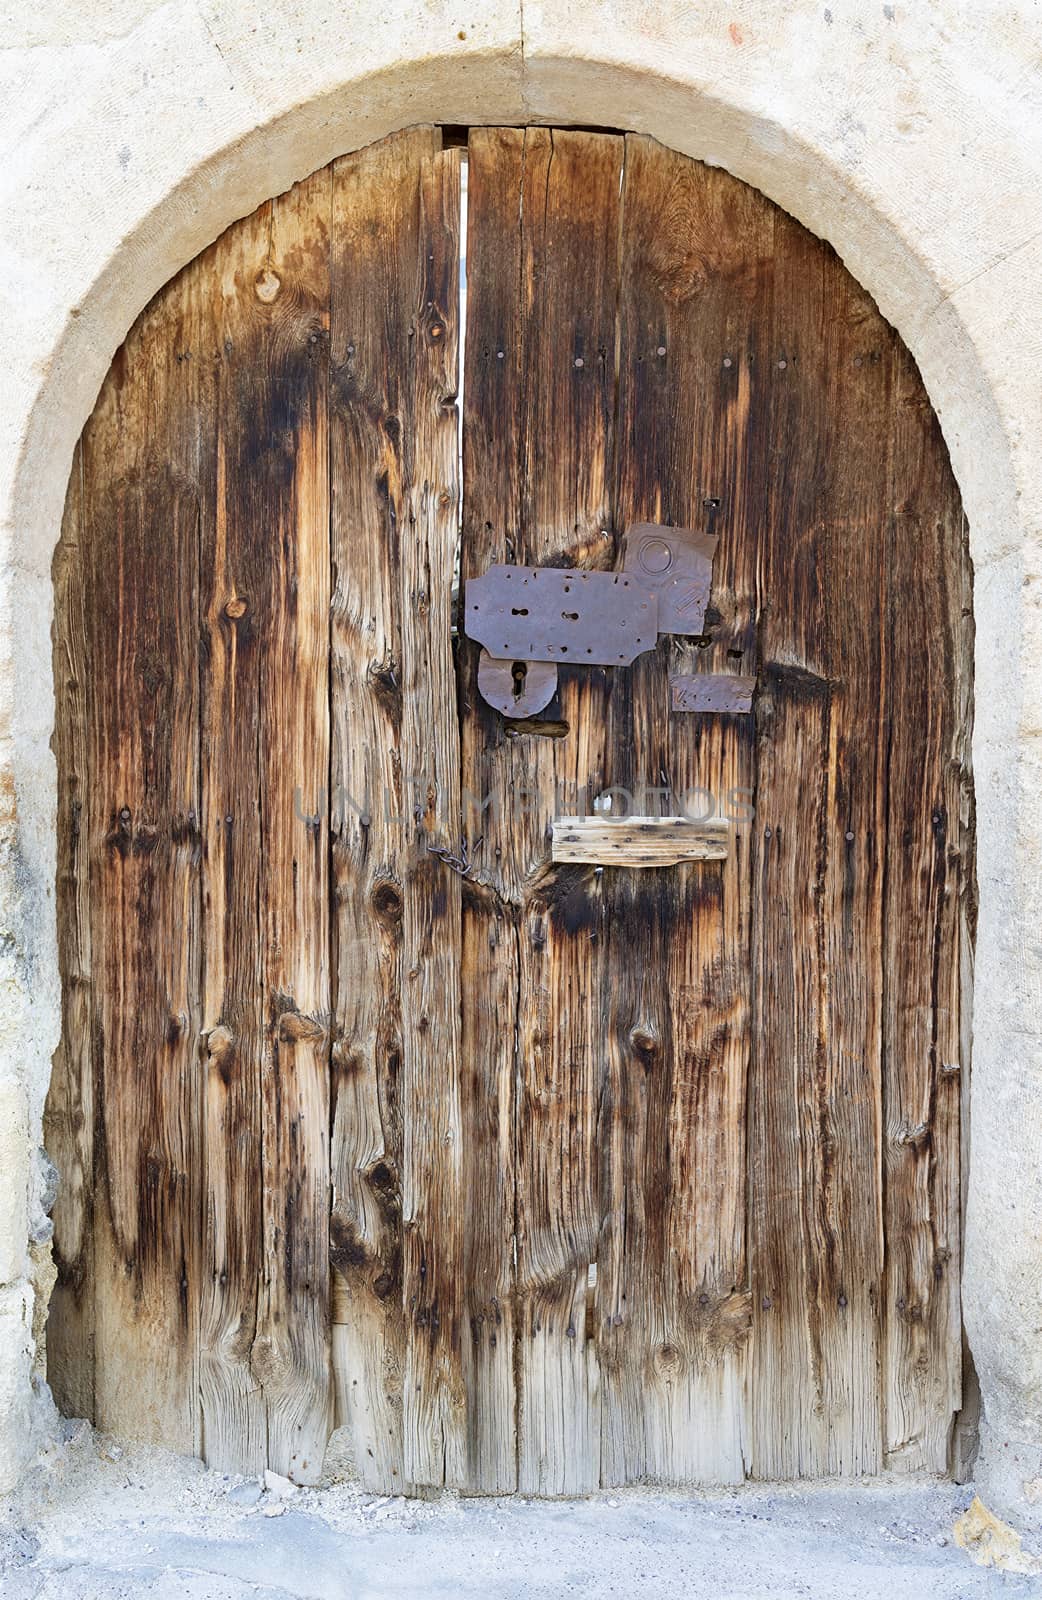 Ancient arched antique wooden doors with a metal lock in the middle by Sergii